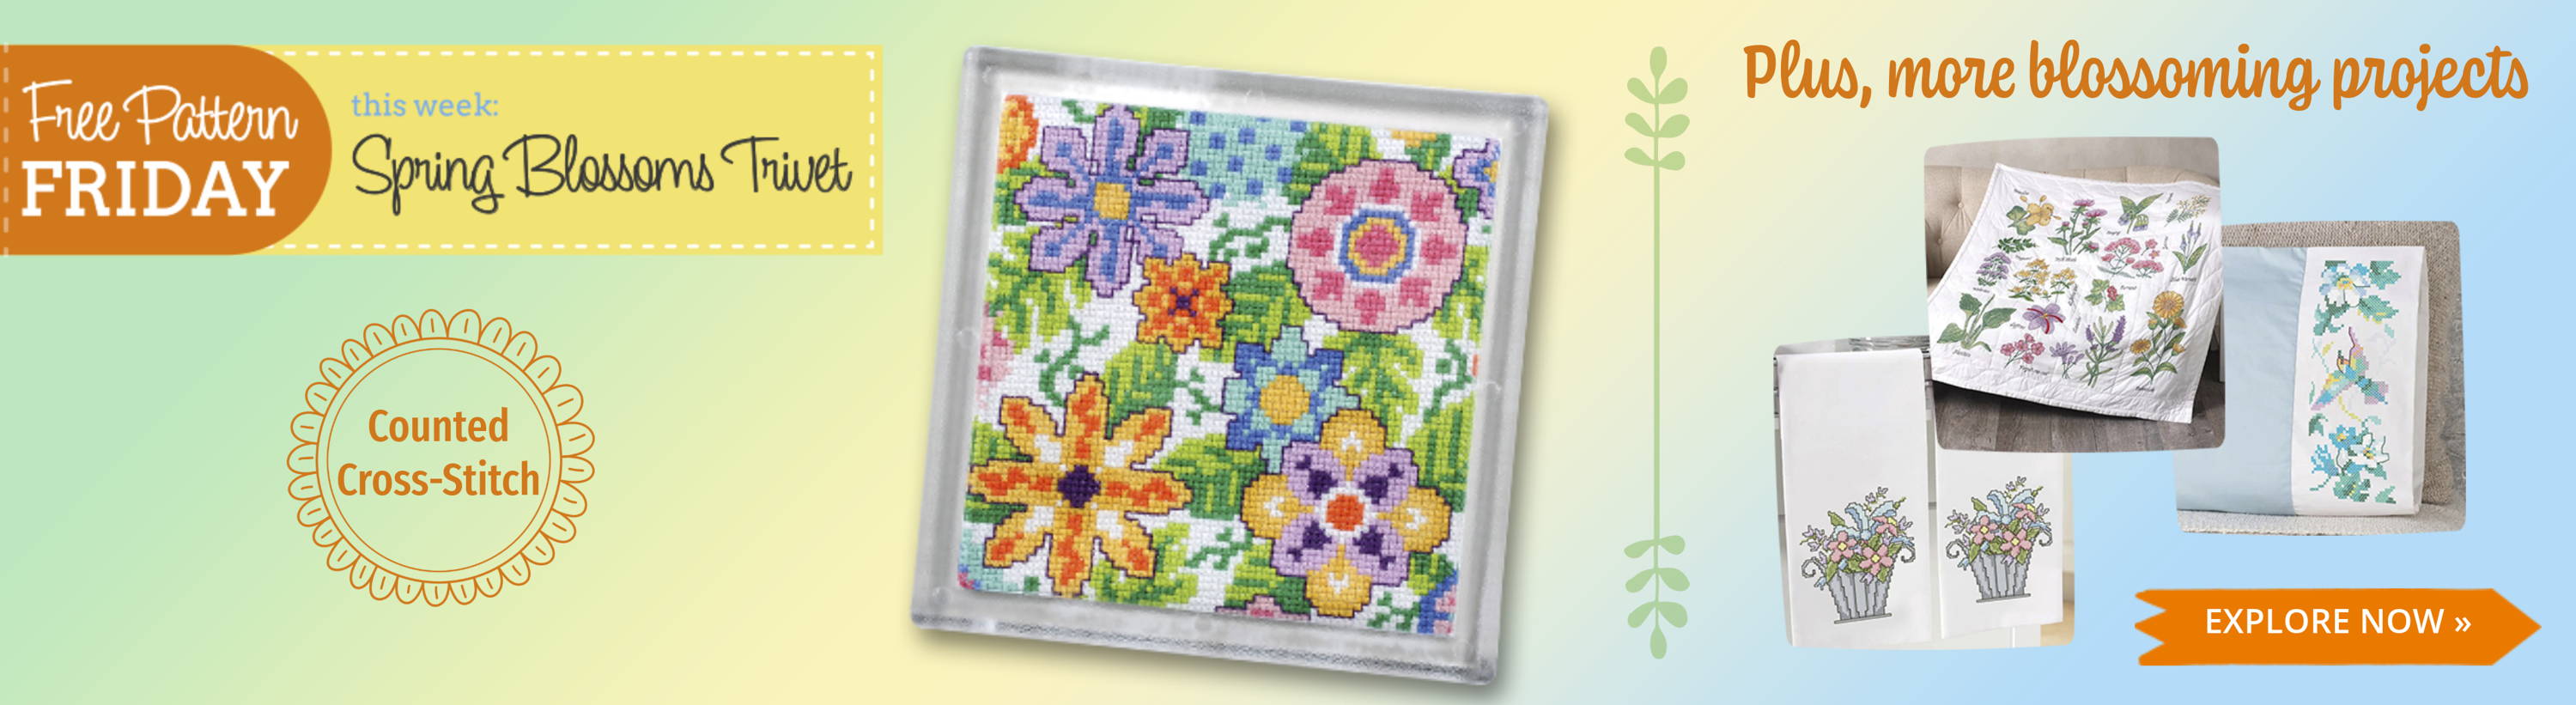 Free Pattern Friday! Spring Blossoms Trivet (Counted Cross-Stitch). Images: Spring Blossoms Trivet and featured needlework projects to explore.